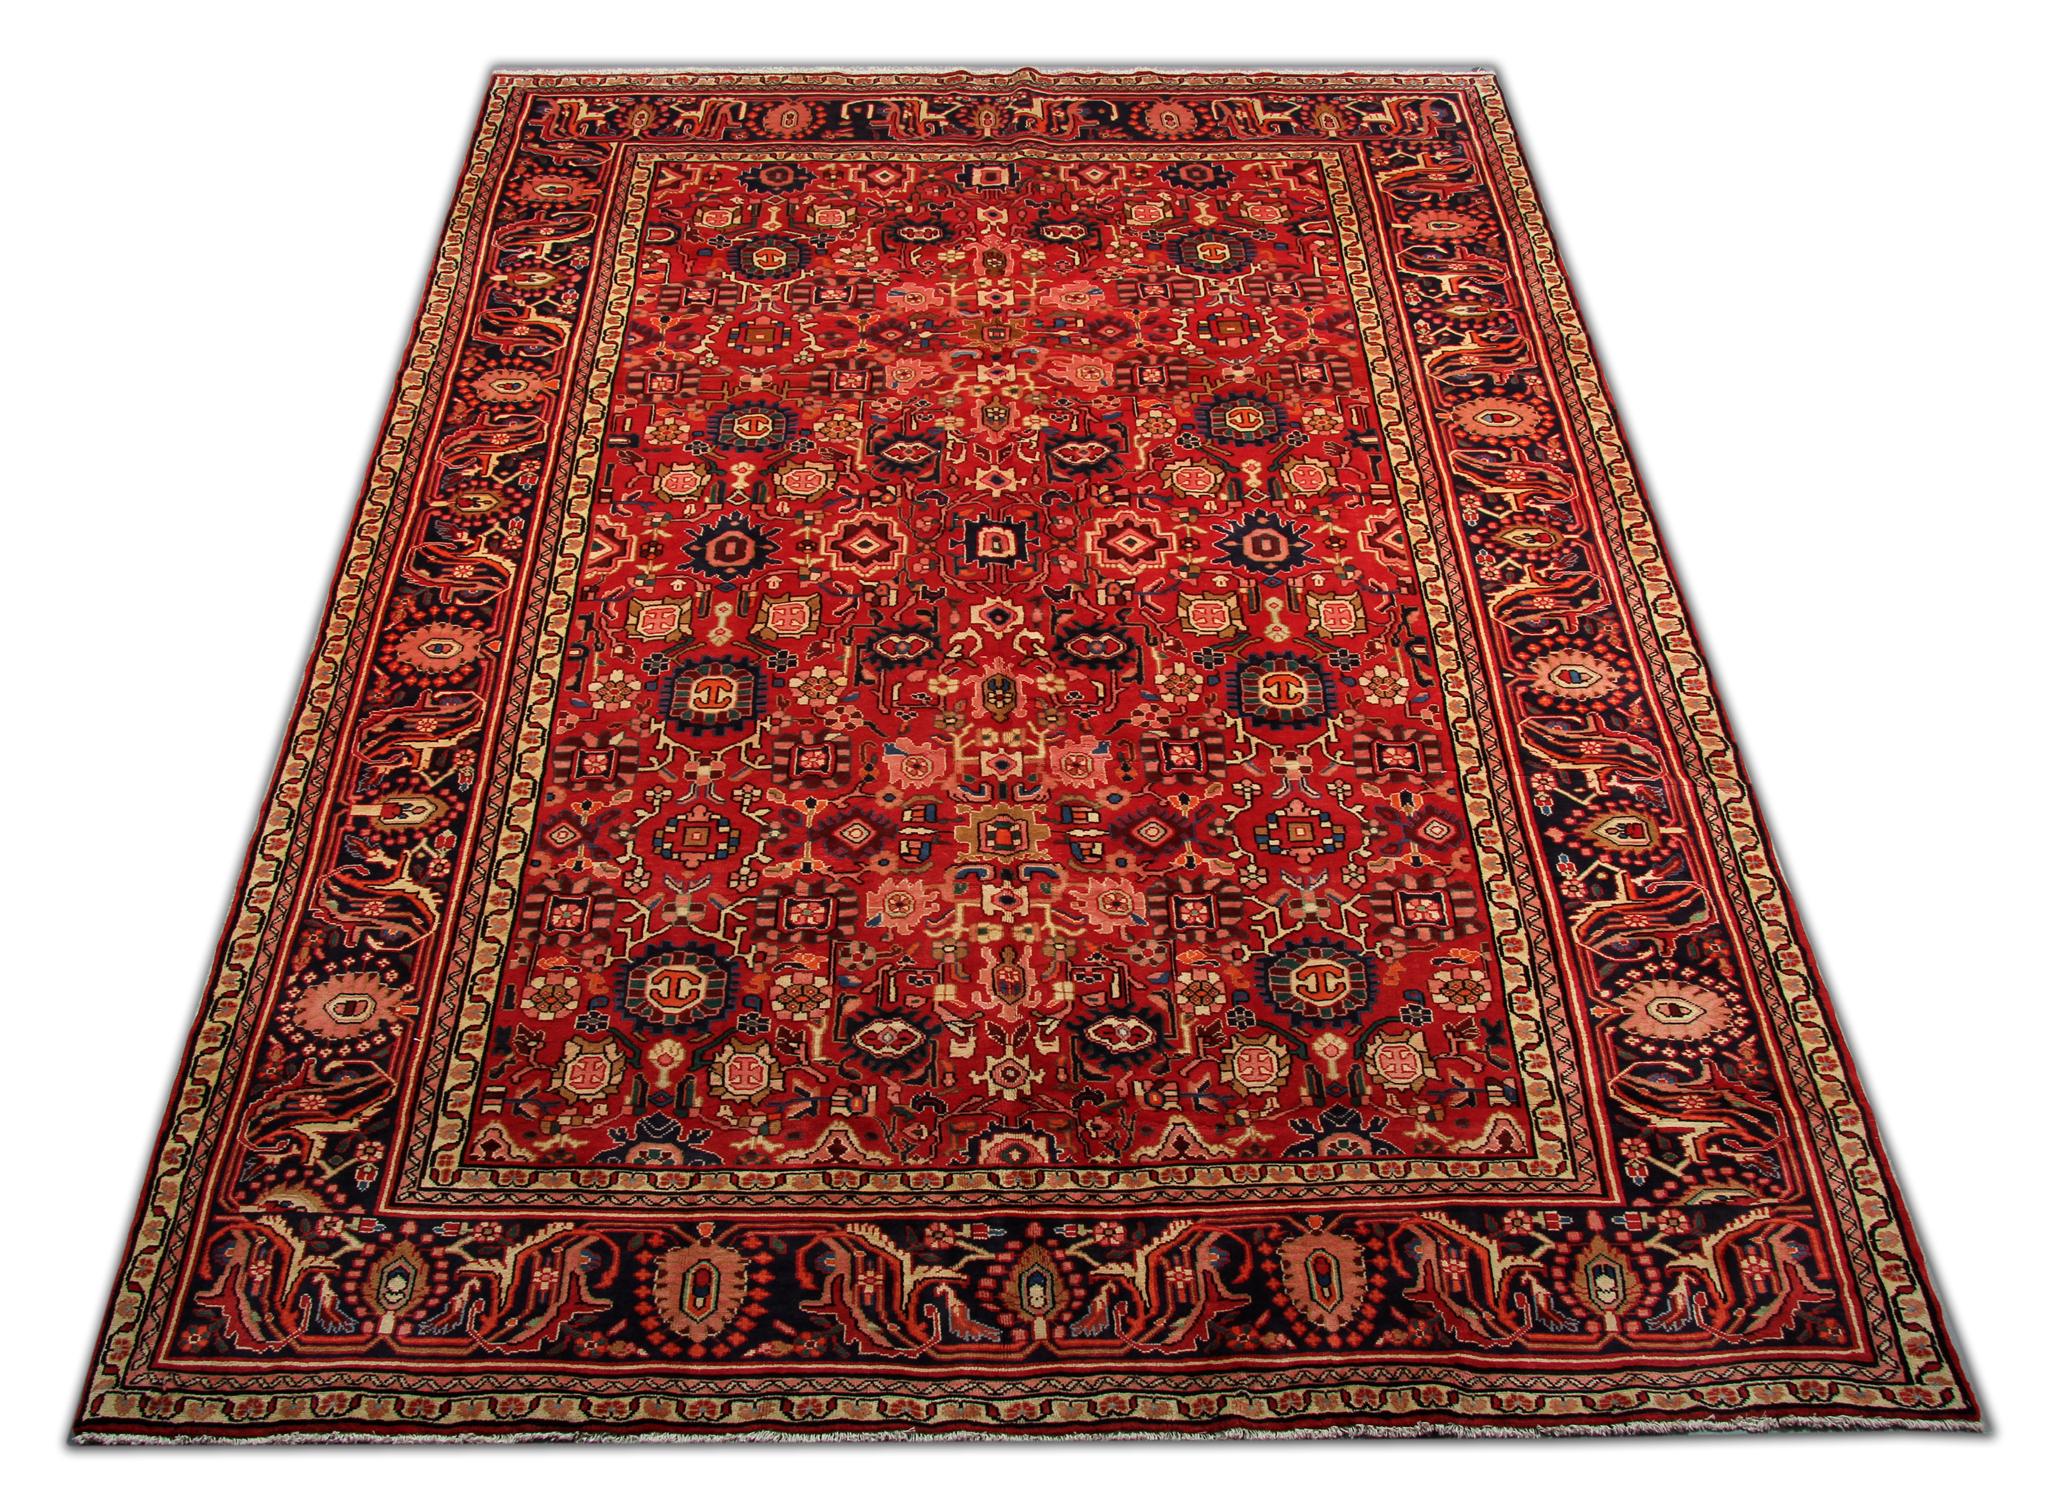 Looking to upgrade your floors with an Antique Rug? This piece is sure to wow your guests…
This fine wool rug was woven by hand in the 1920s and features a bold all-over central design with a decorative enclosing border. Woven on a rich red